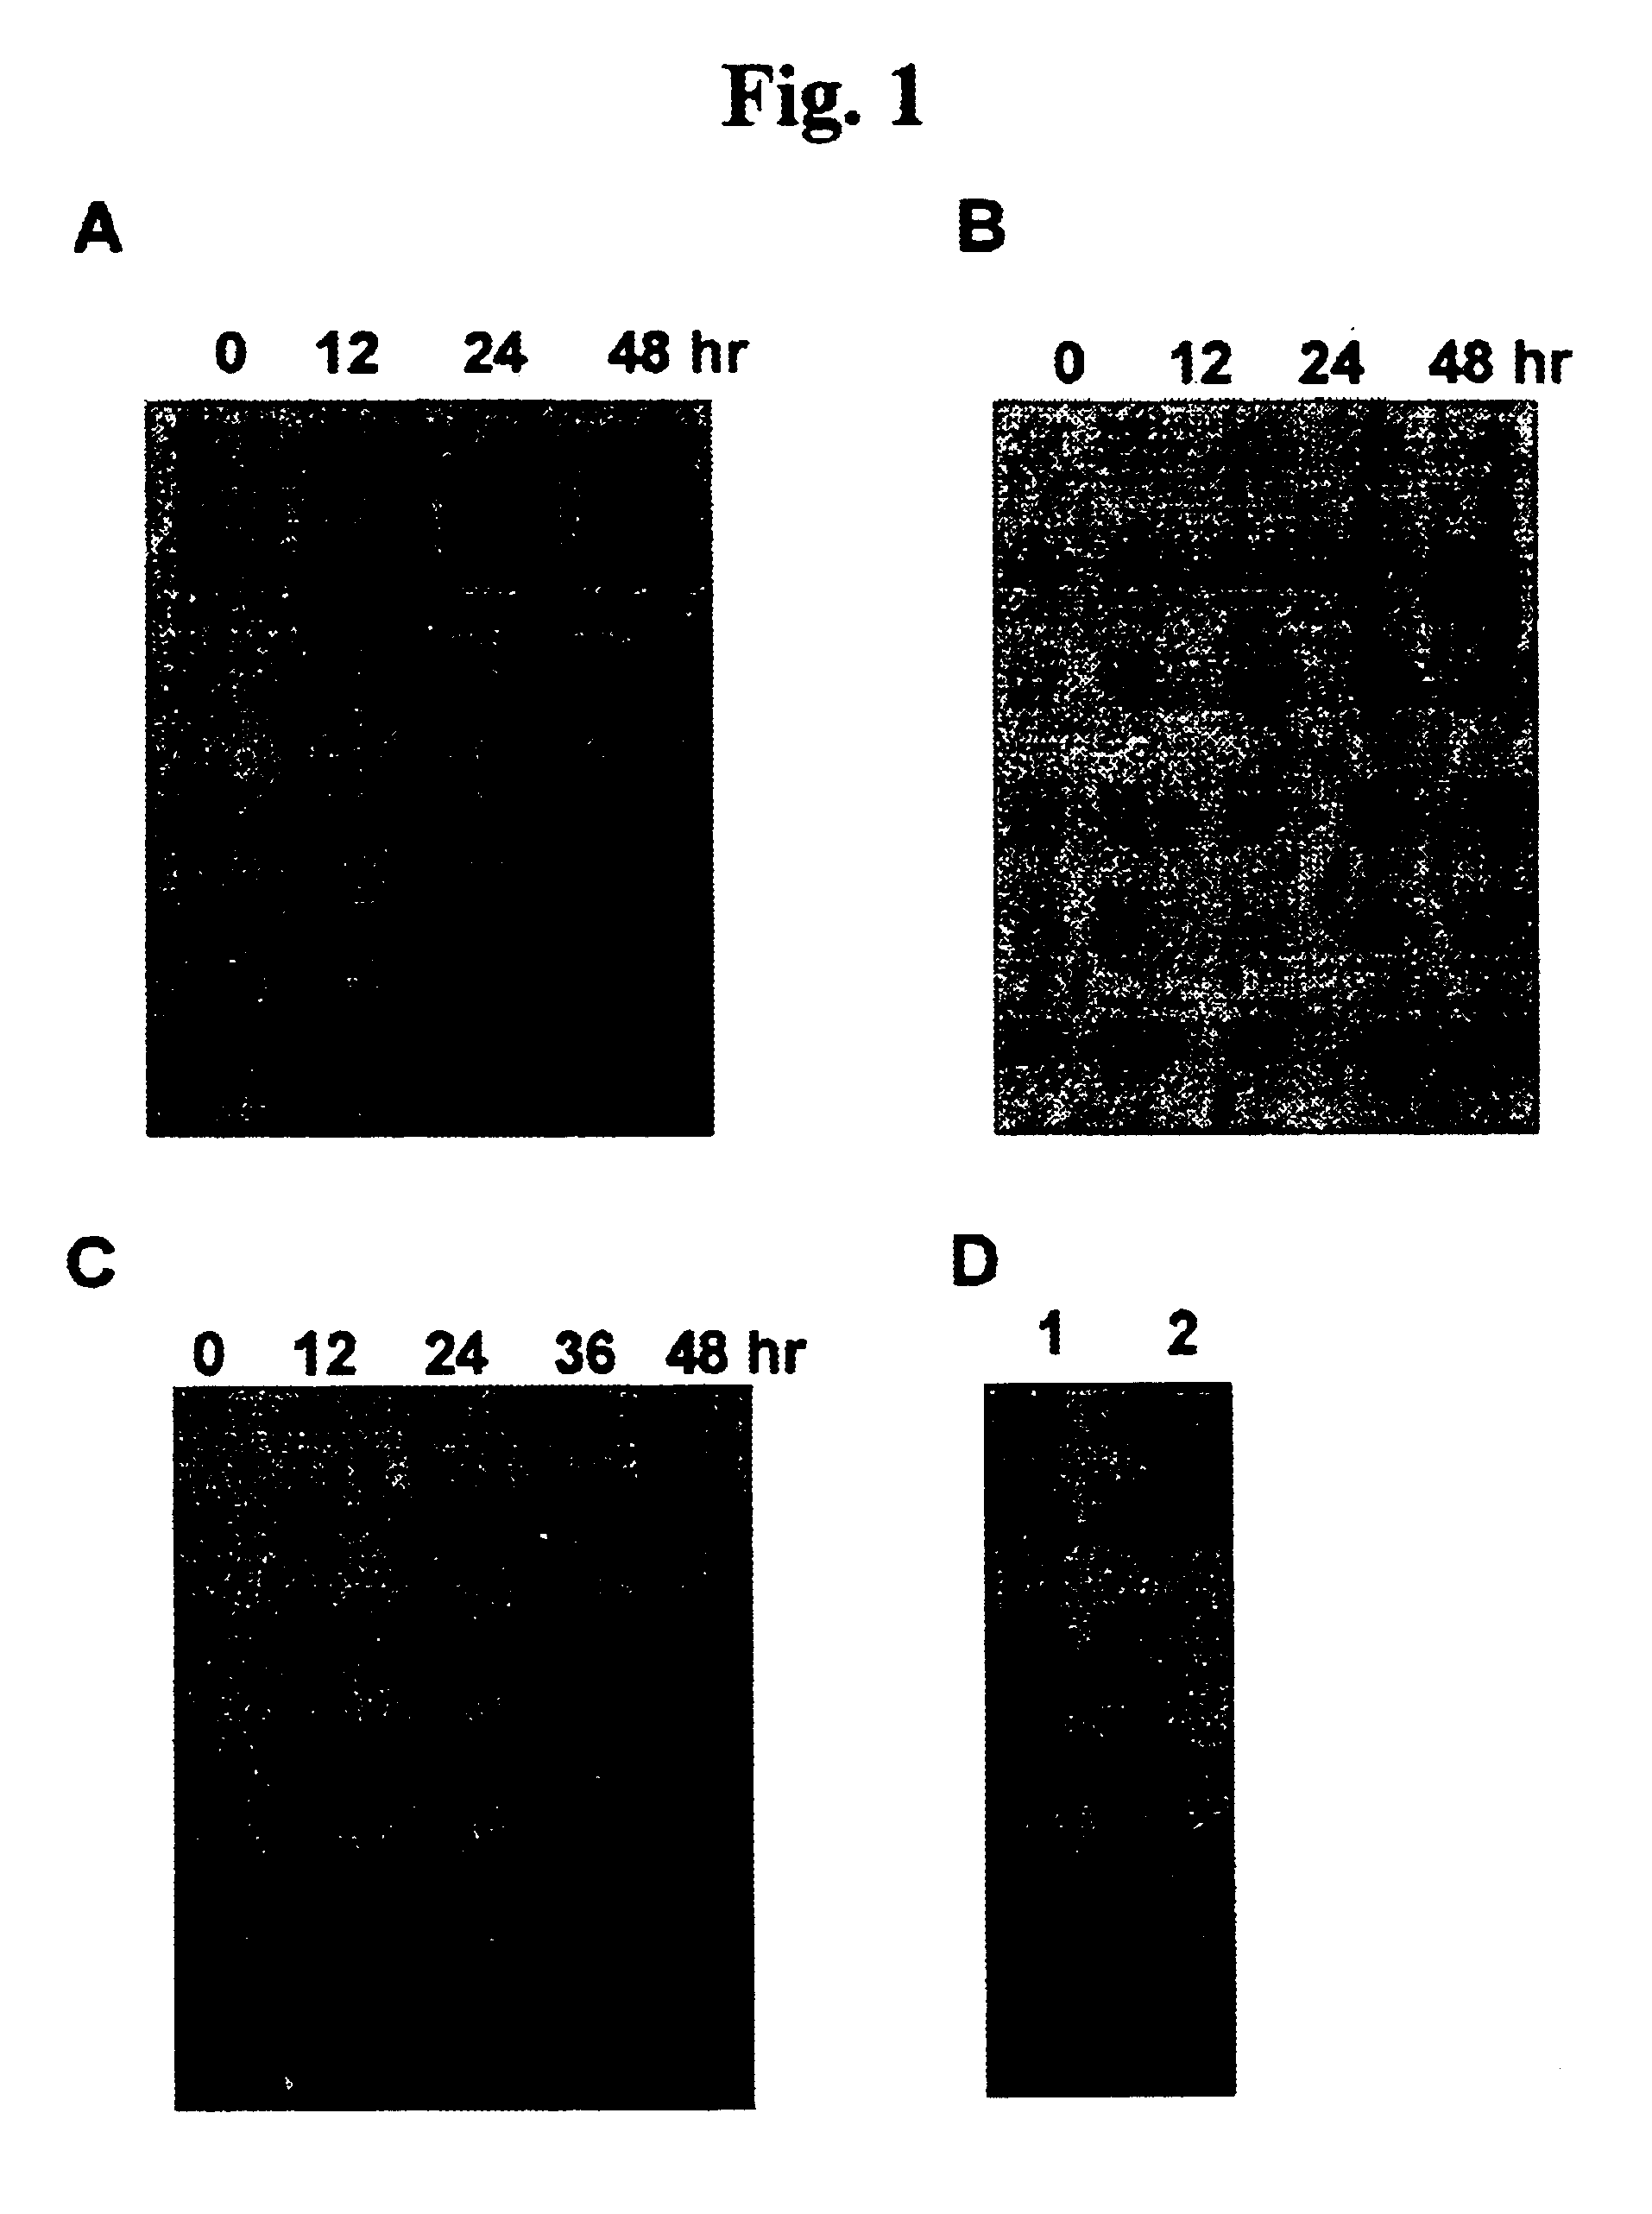 Endonuclease of immune cell, process for producing the same and immune adjuvant using the same